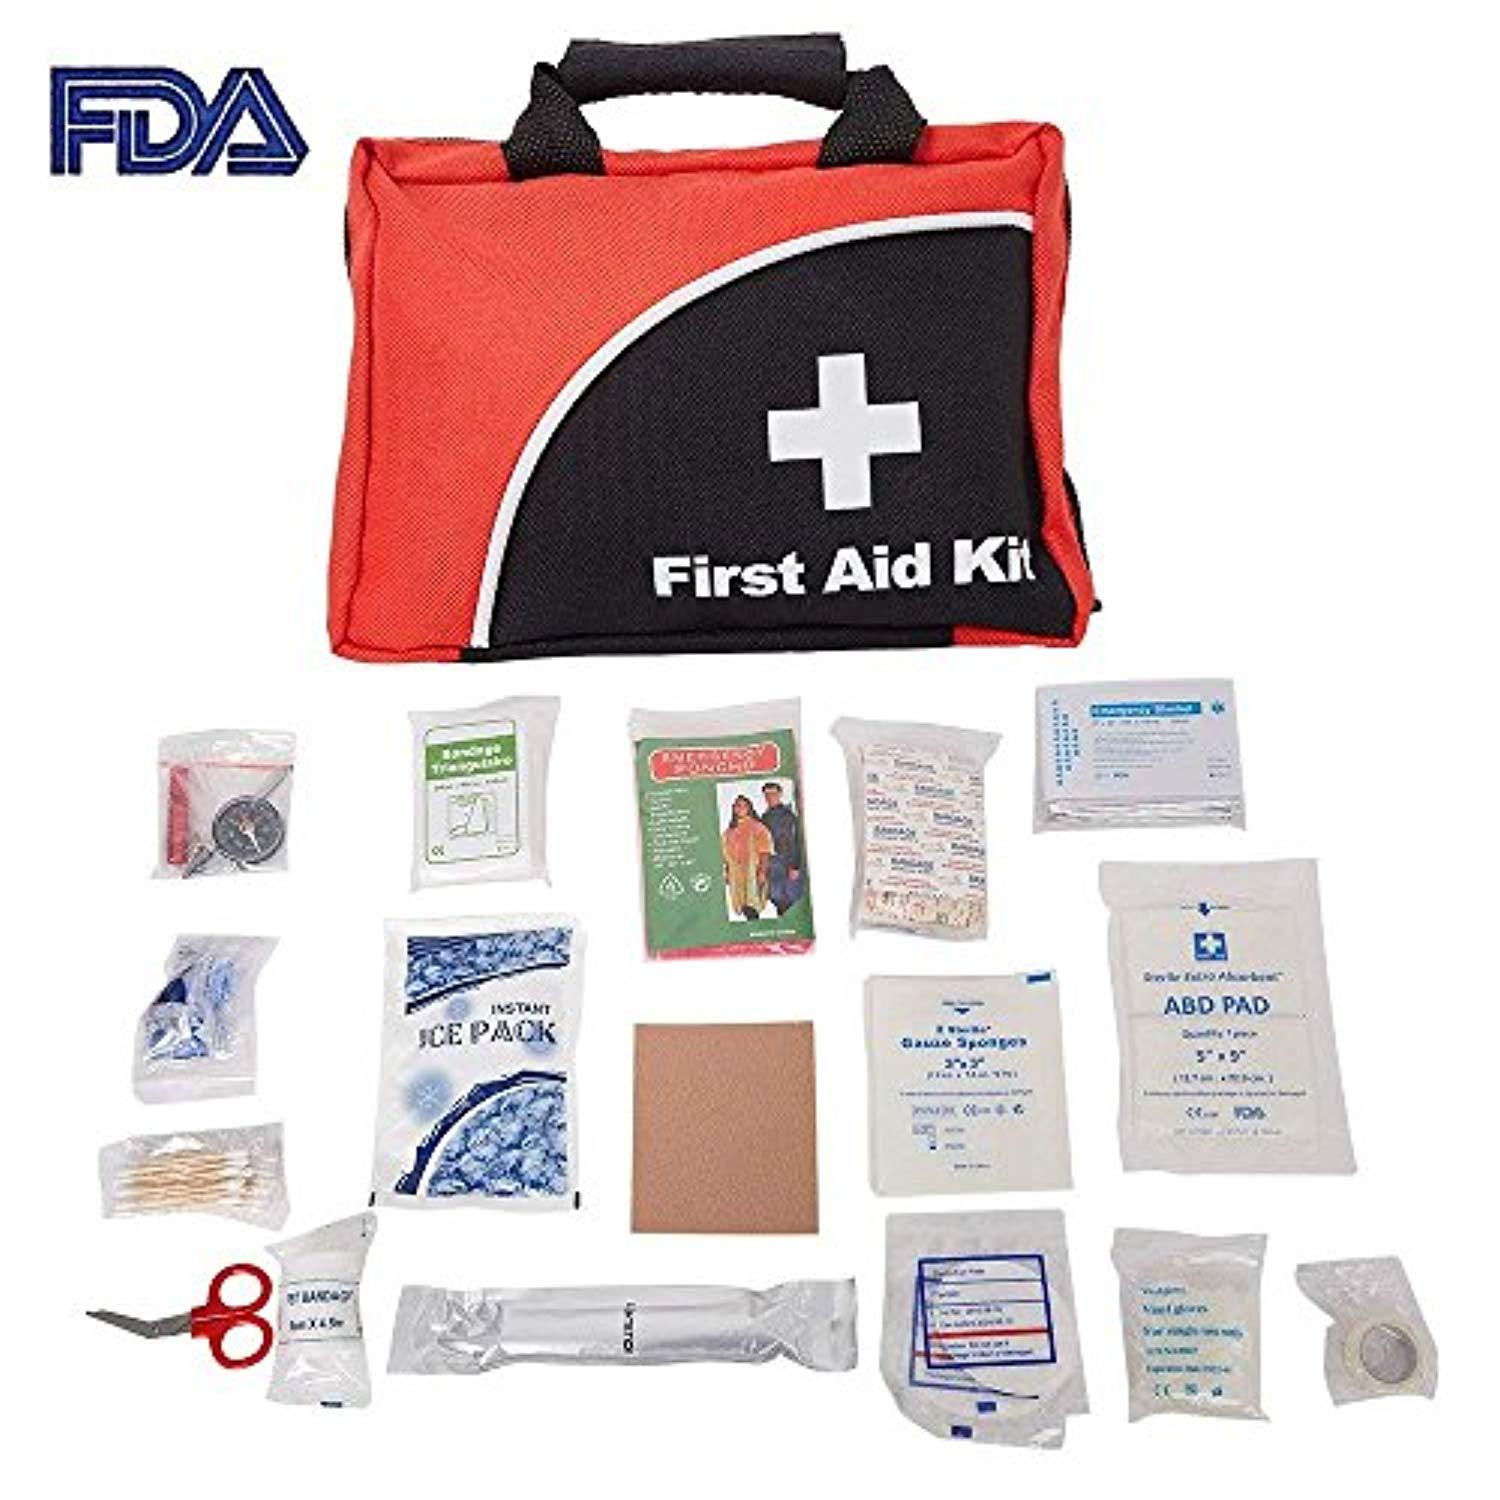 Bosonshop 110 Pieces FDA Approved First Aid Kit Compact Emergency Survival Kit Home School, Office